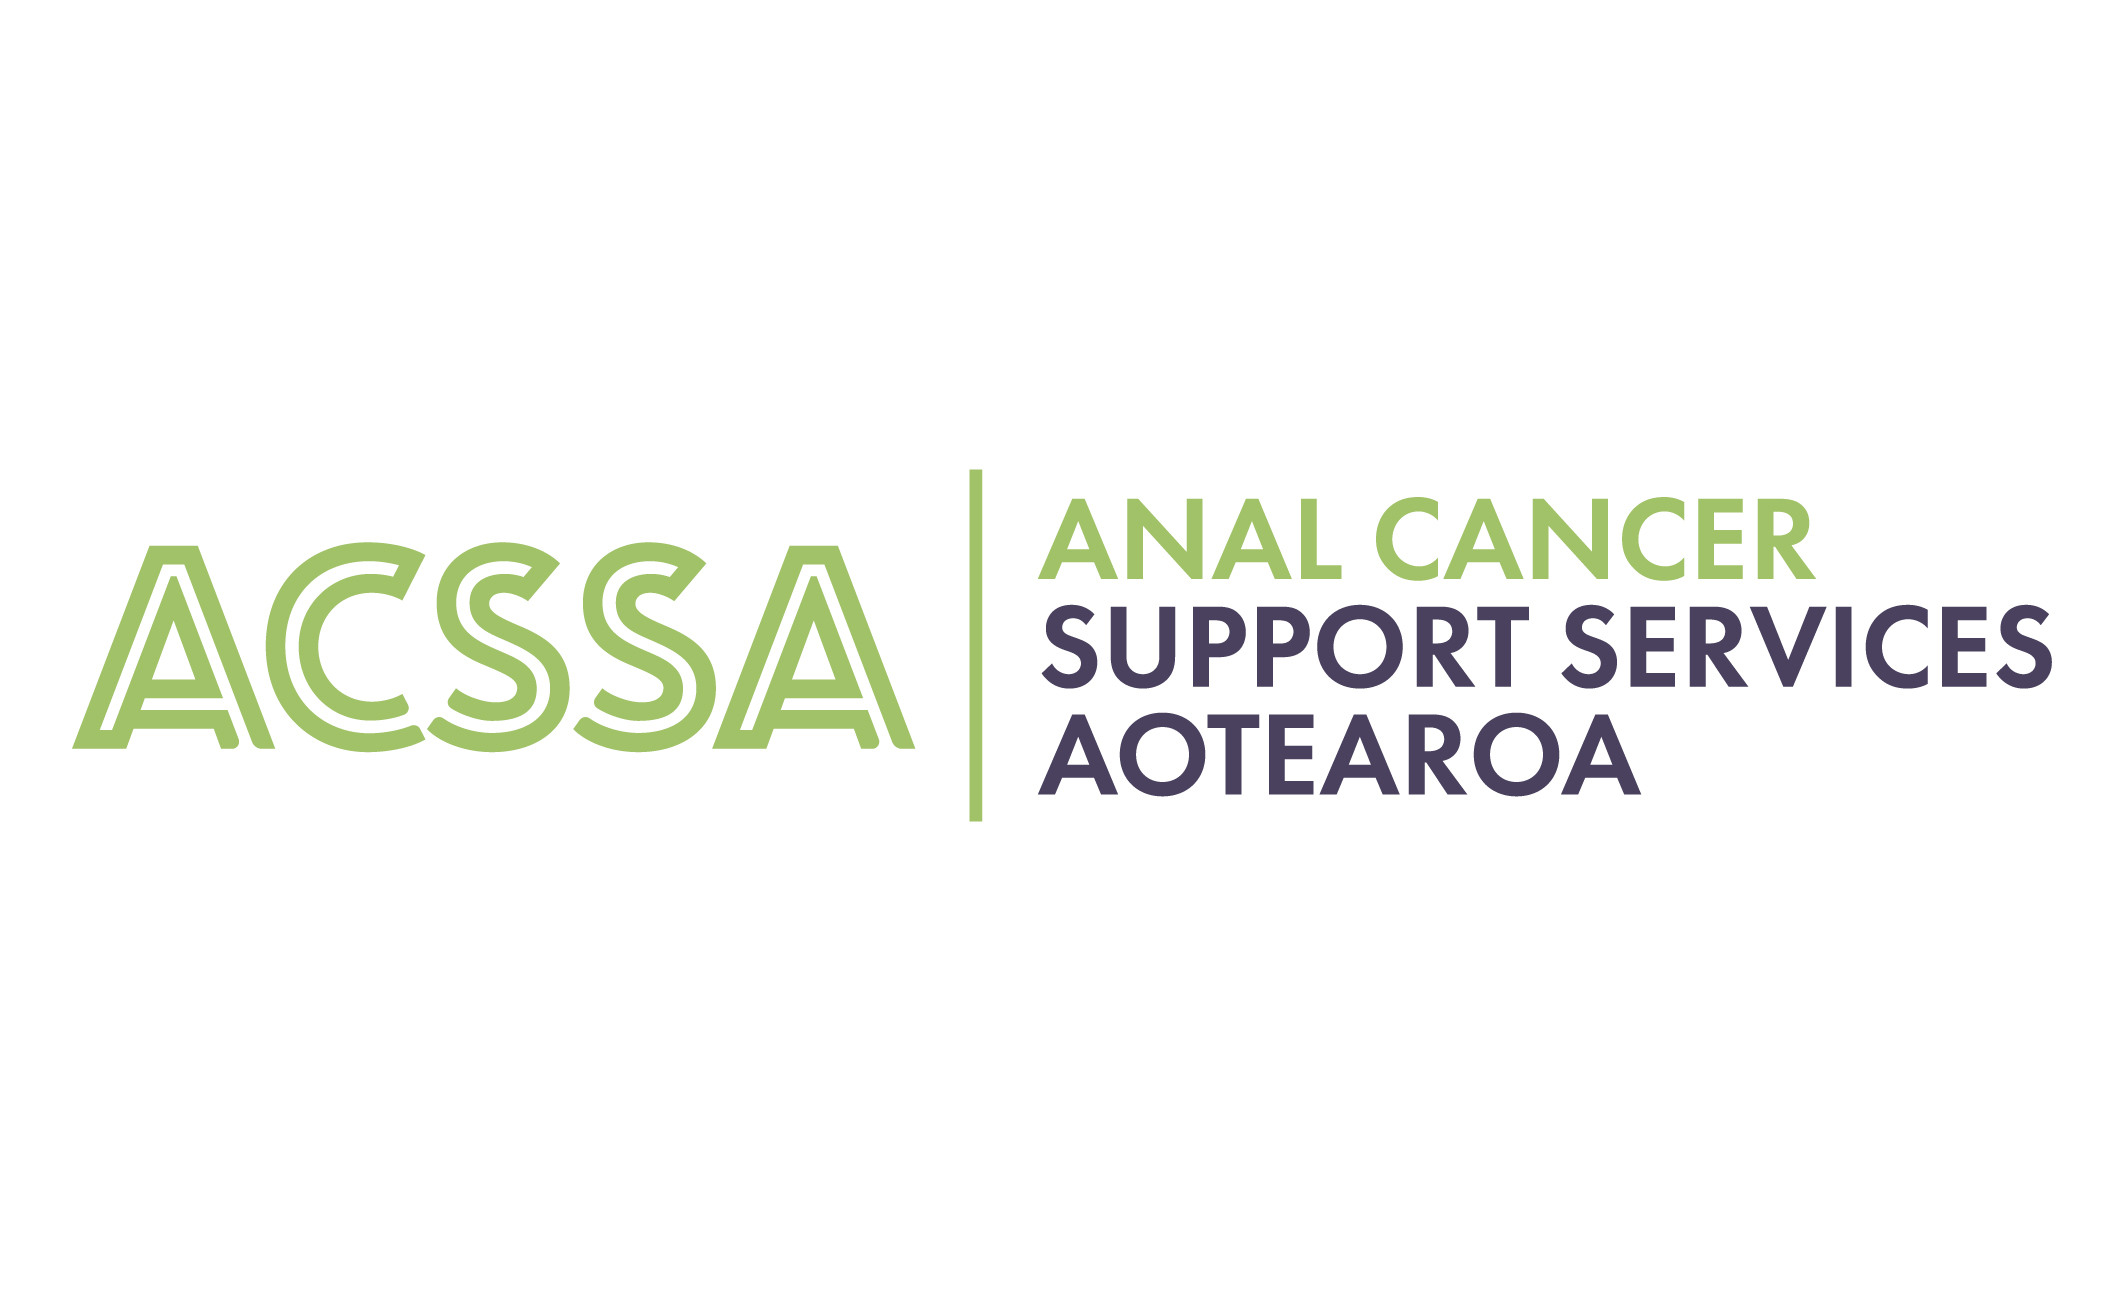 Anal Cancer Support Services AOTEAROA